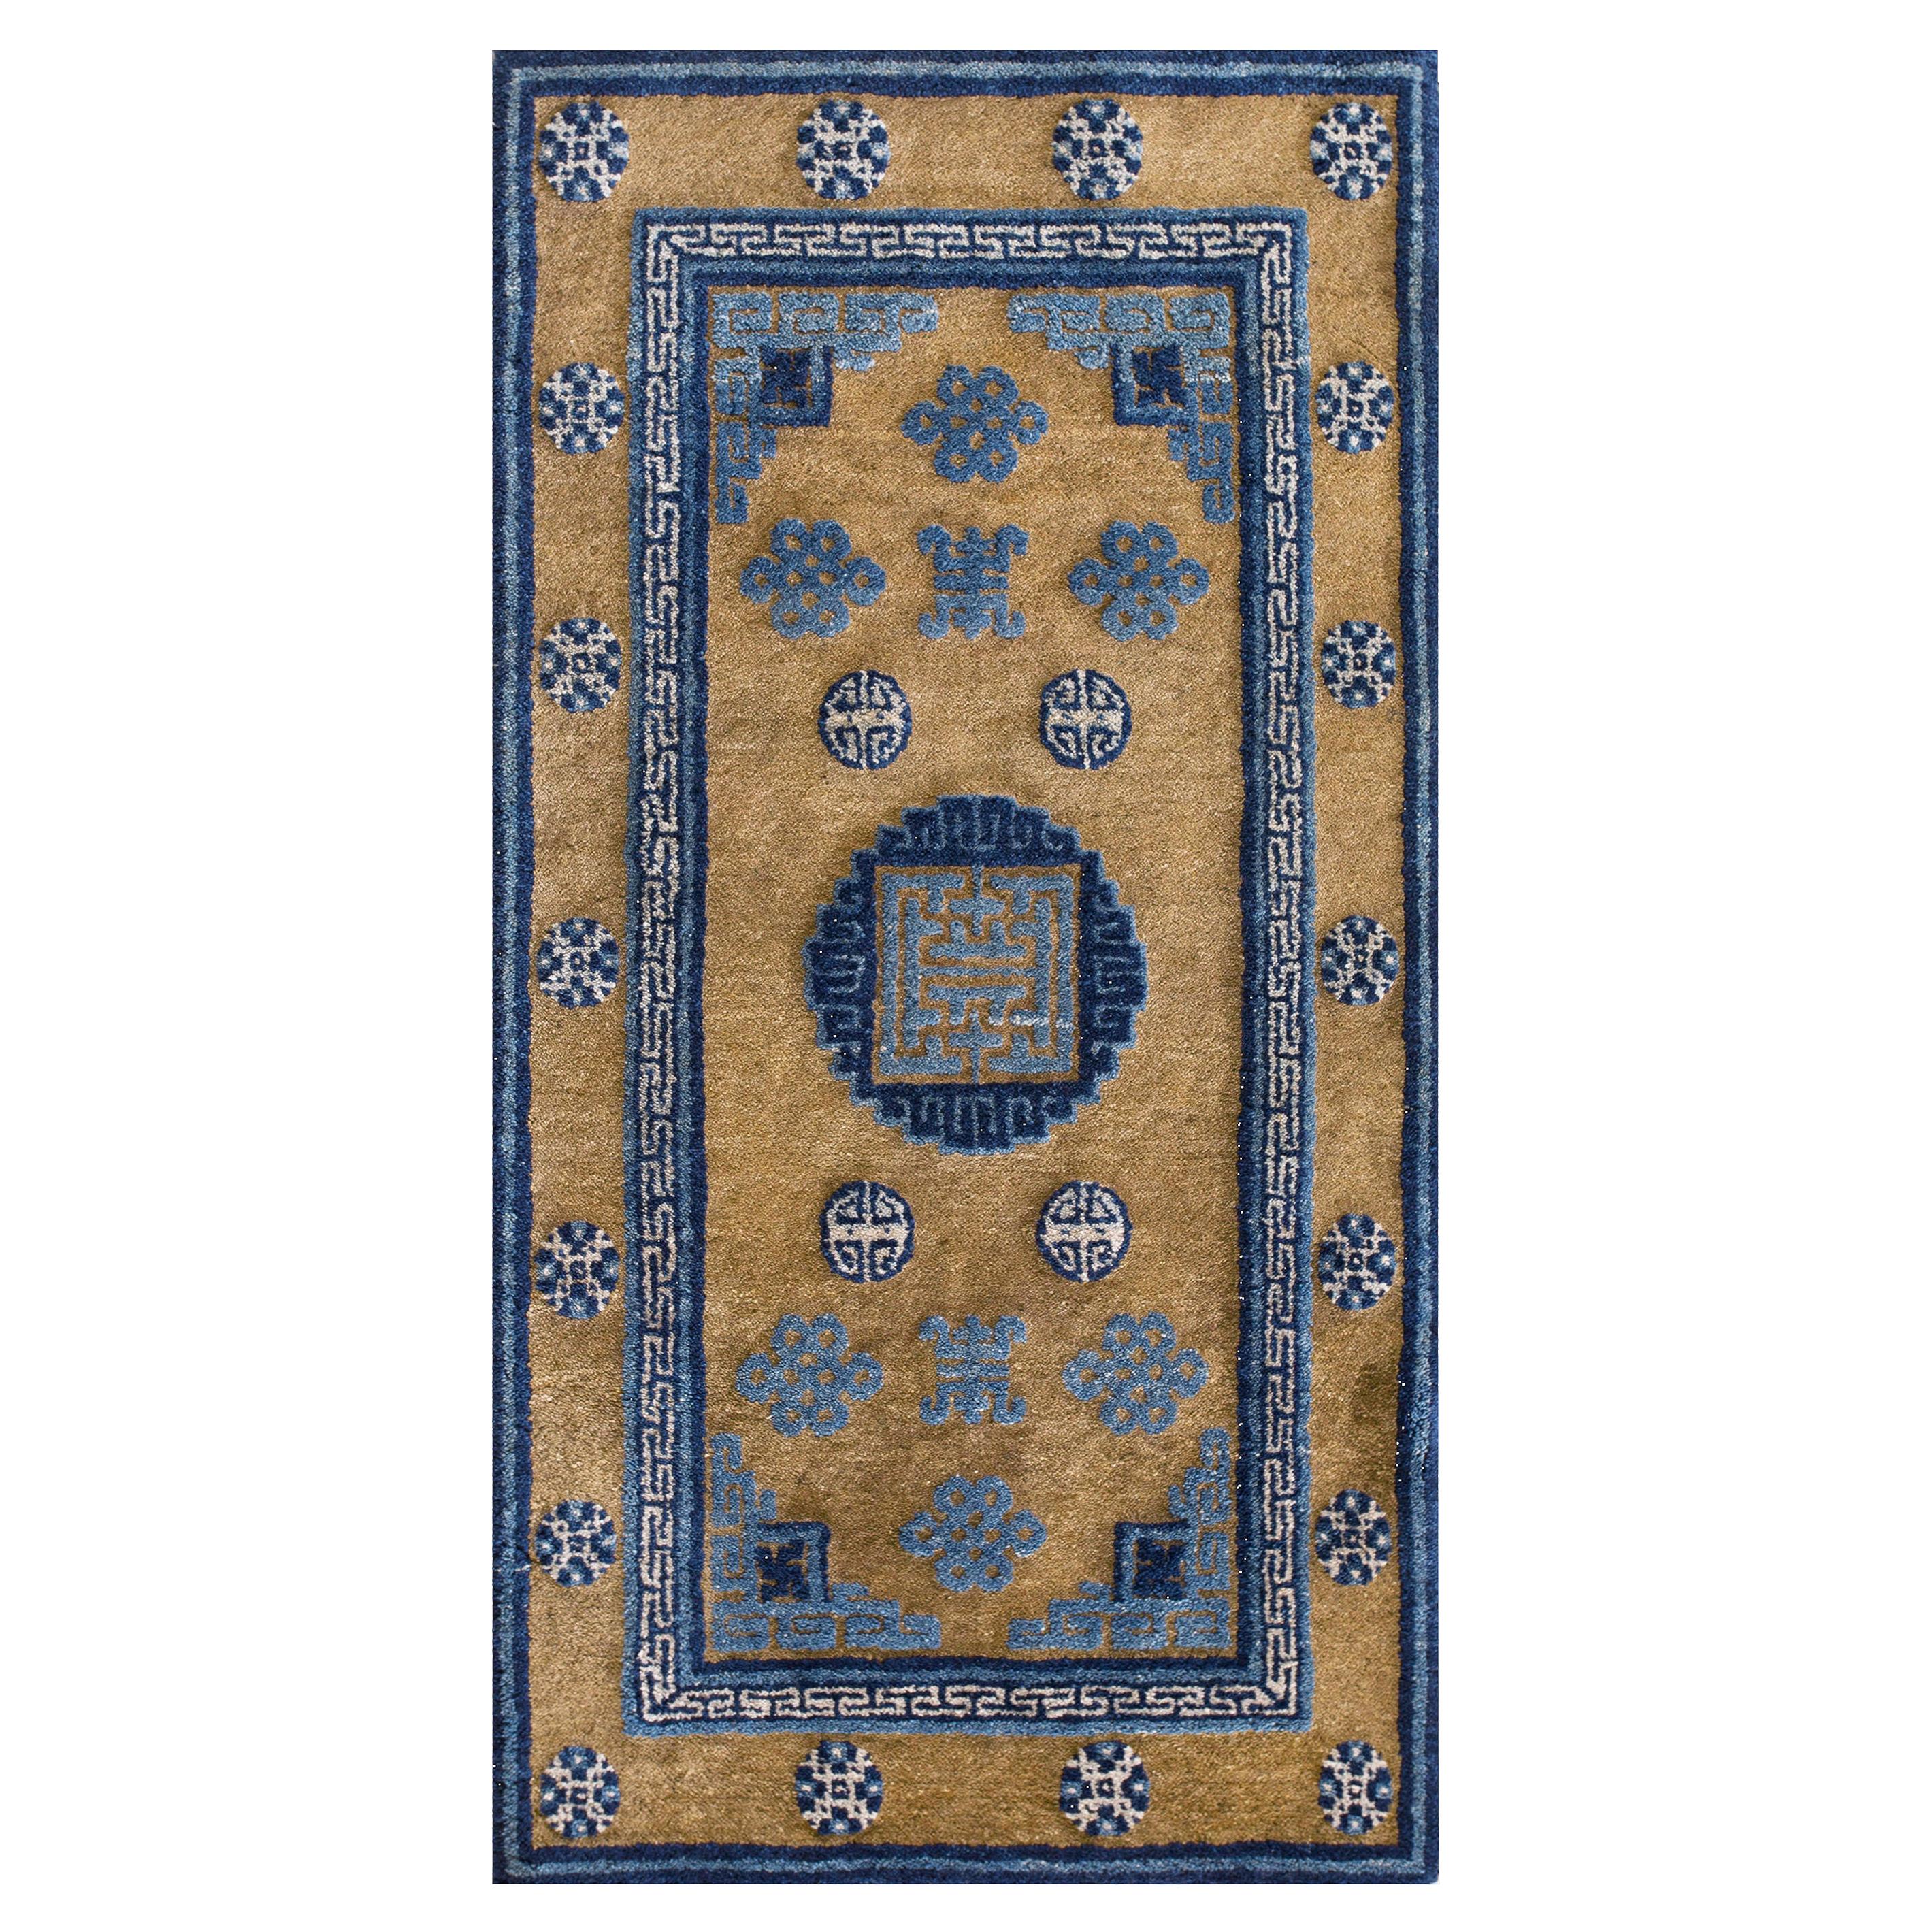 Early 20th Century Chinese Baotou Rug ( 2'2" x 4'2" - 66 x 127 )